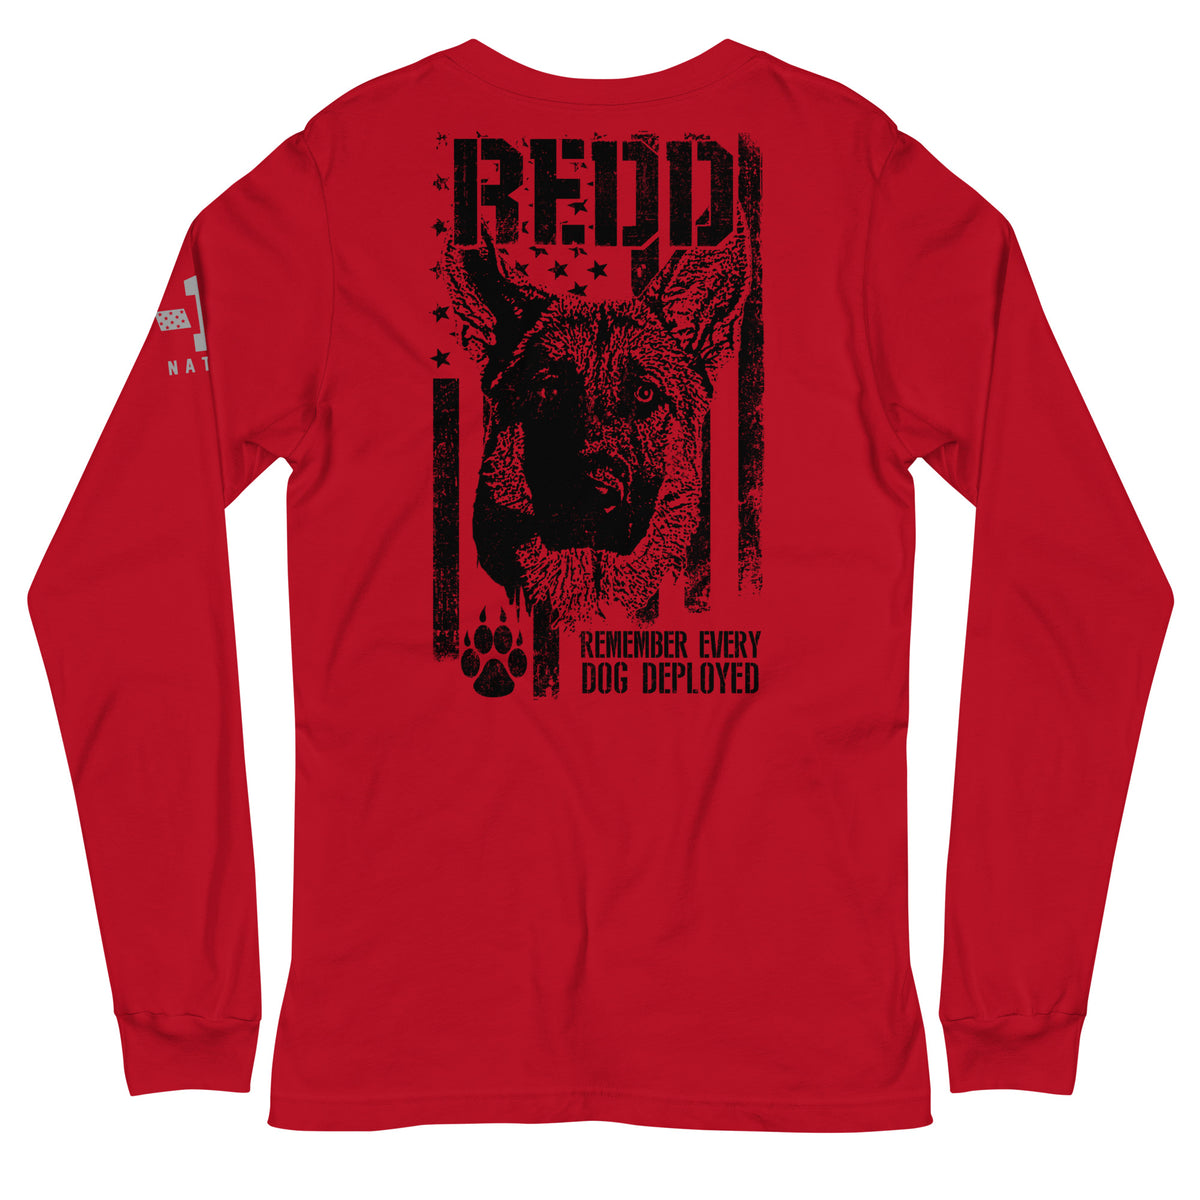 R.E.D.D. Remember Every Dog Deployed Long Sleeve